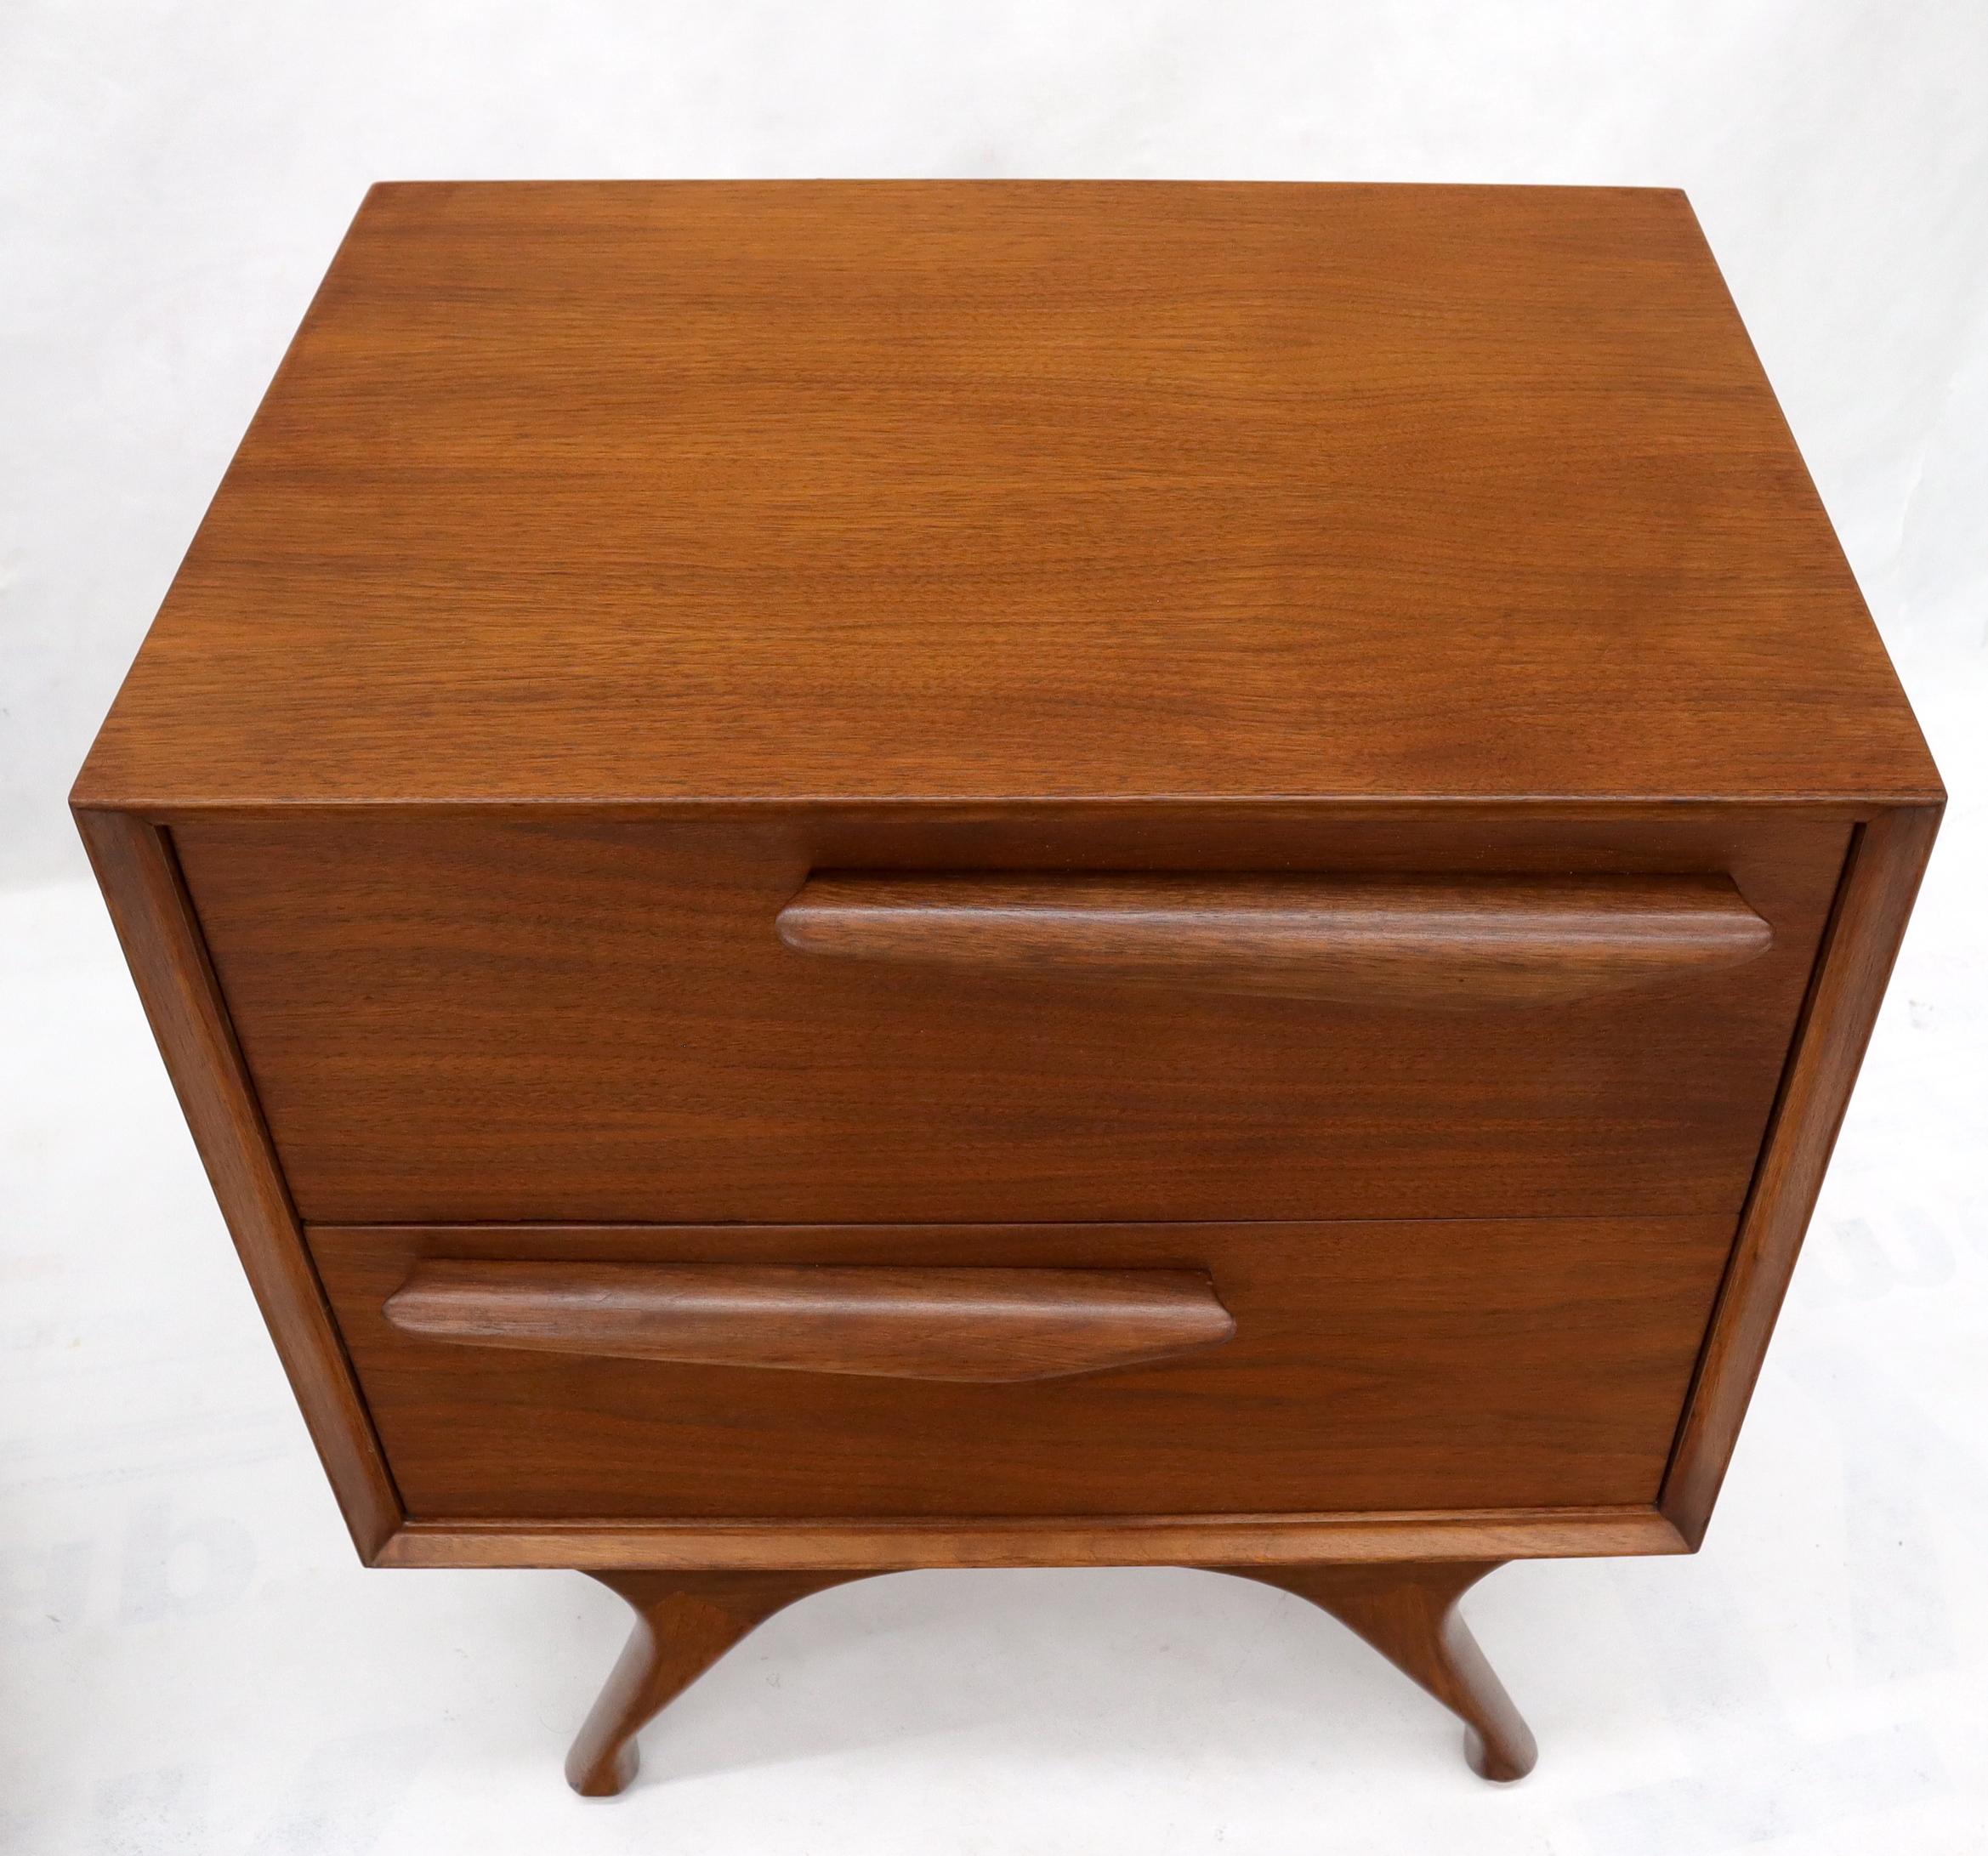 Lacquered Pair of American Modern Walnut Sculptured Legs Pulls Two Drawers Nightstands For Sale